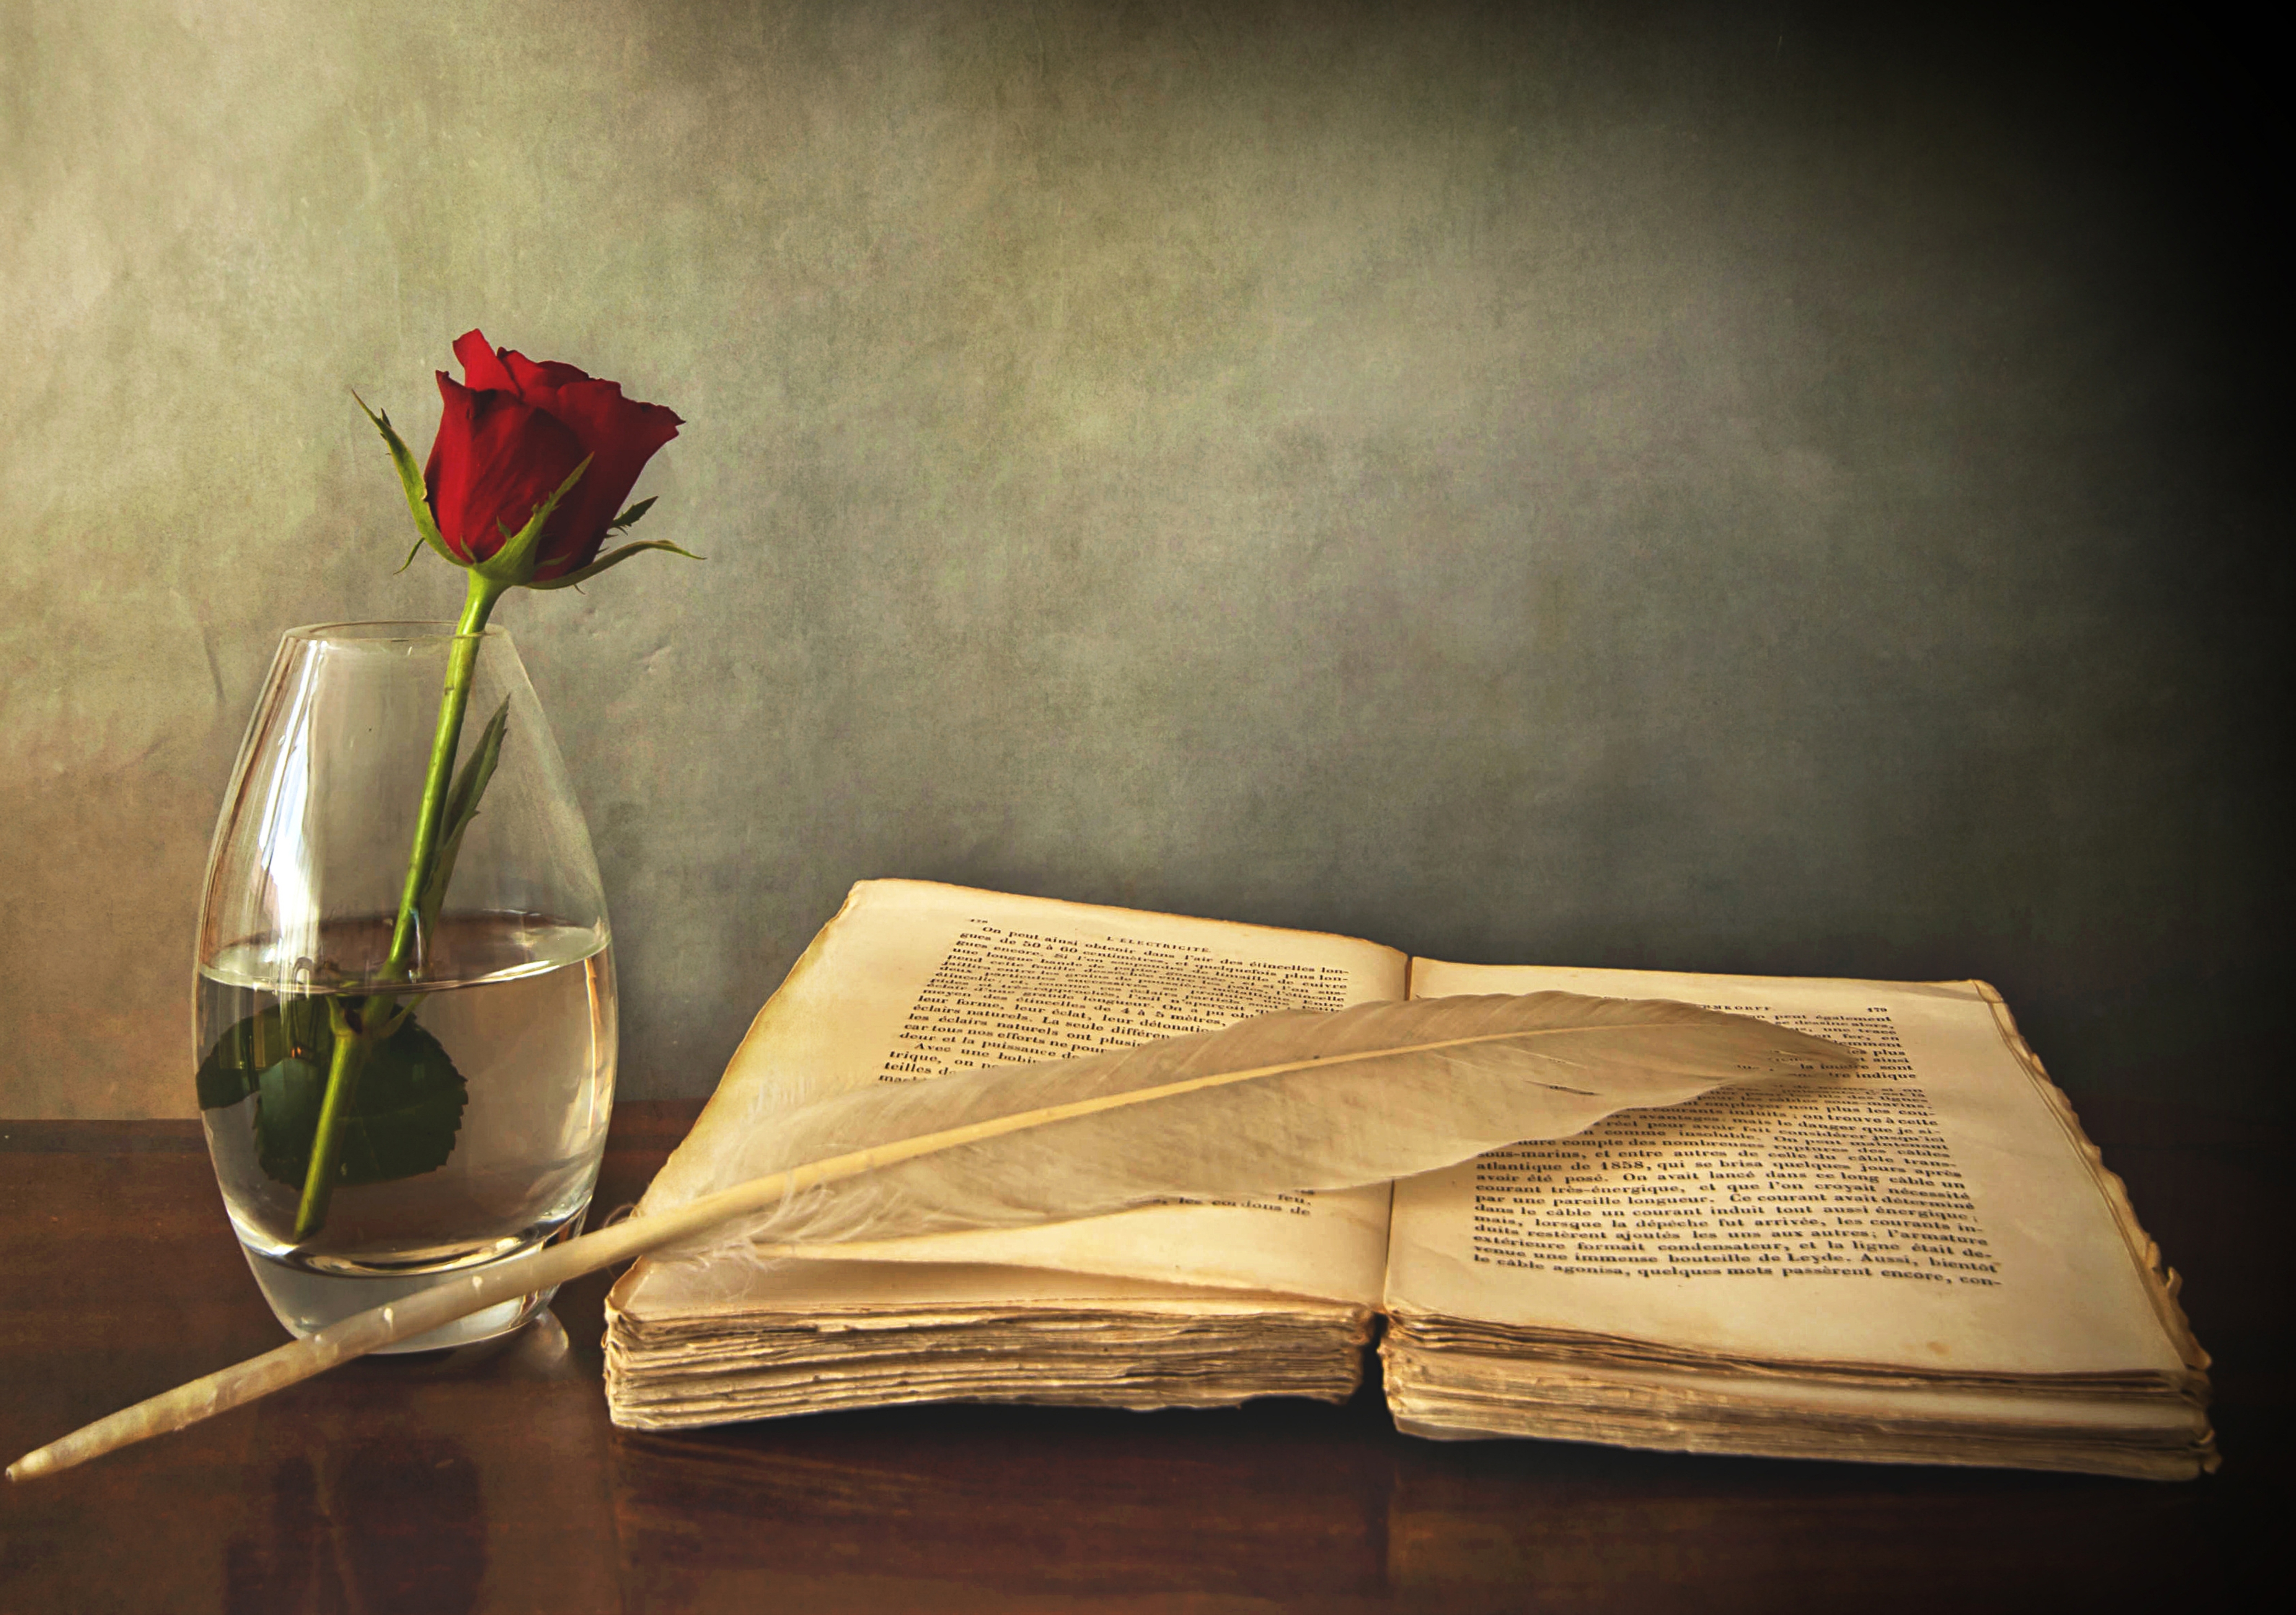 red, miscellanea, feather, miscellaneous, rose flower, rose, old, table, vase, book, pen cell phone wallpapers